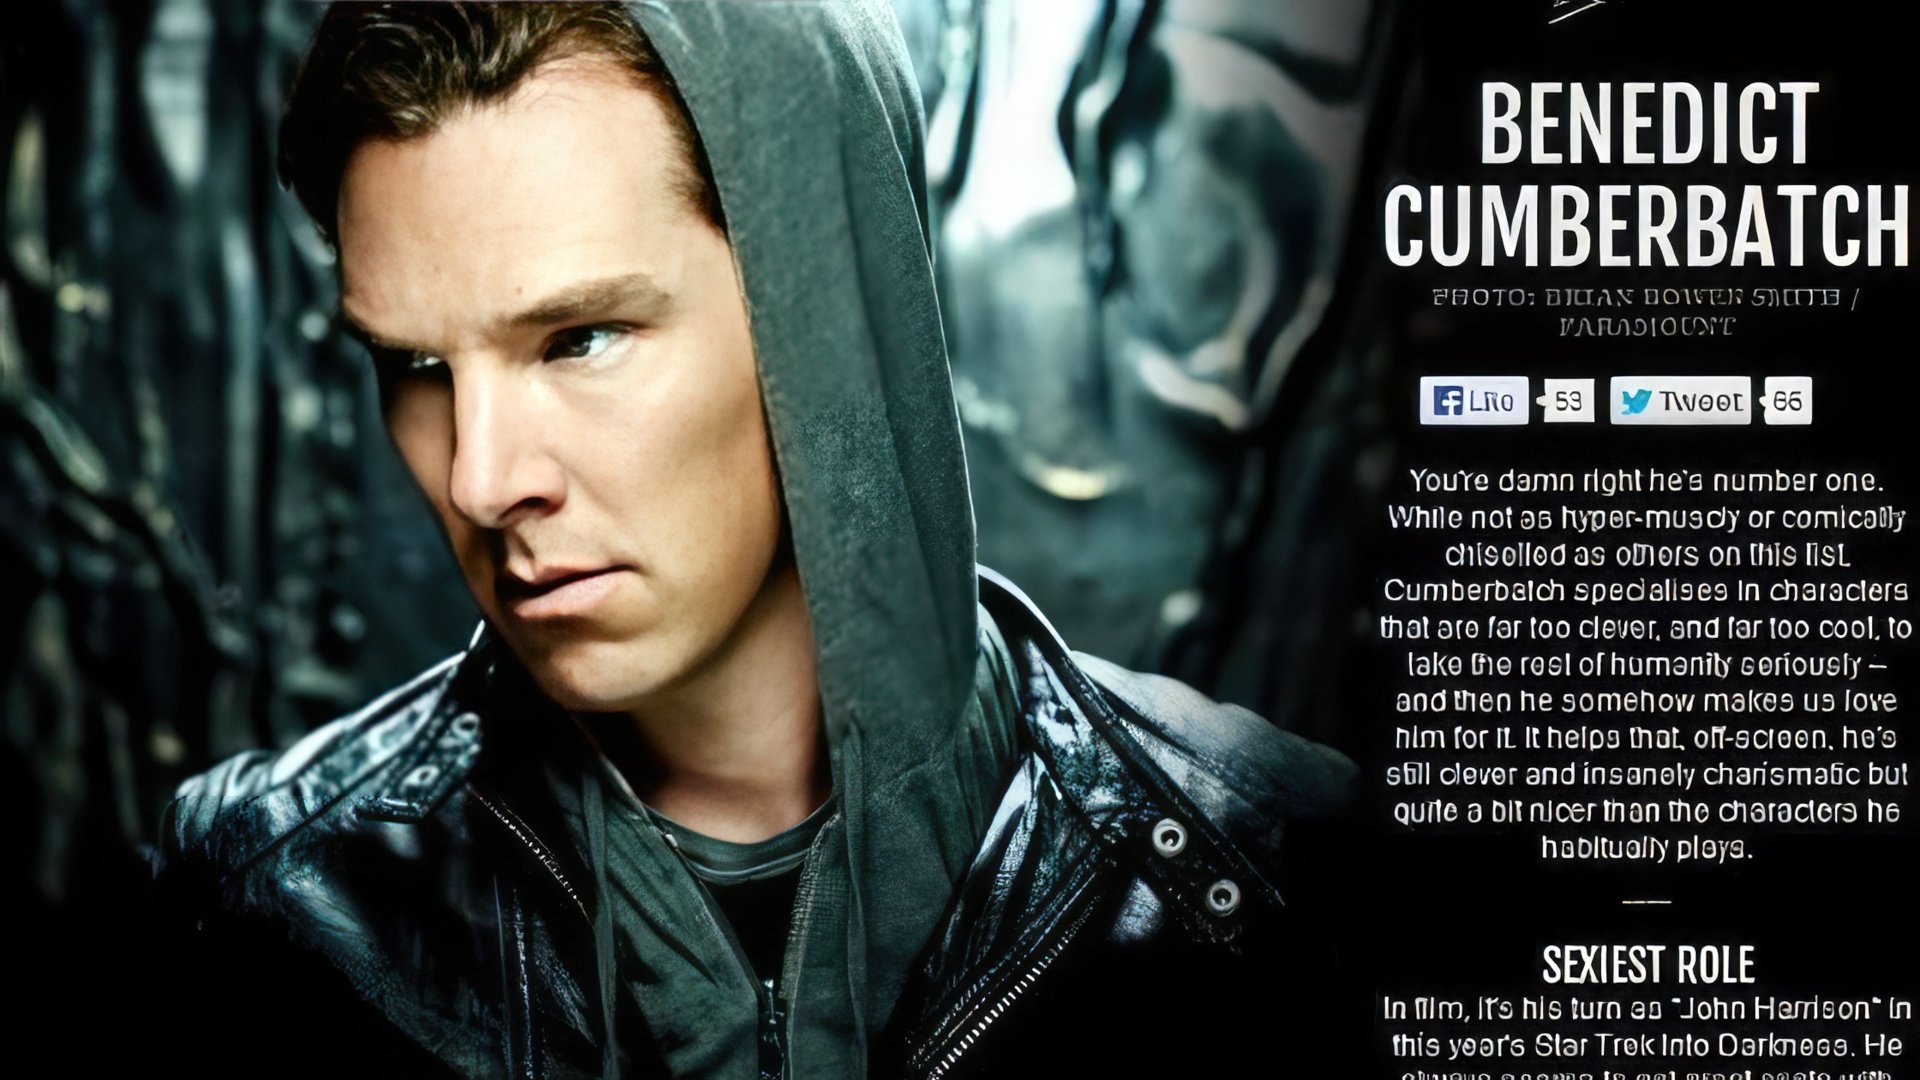 Empire Magazine: 'Benedict Cumberbatch - the sexiest actor of our time'